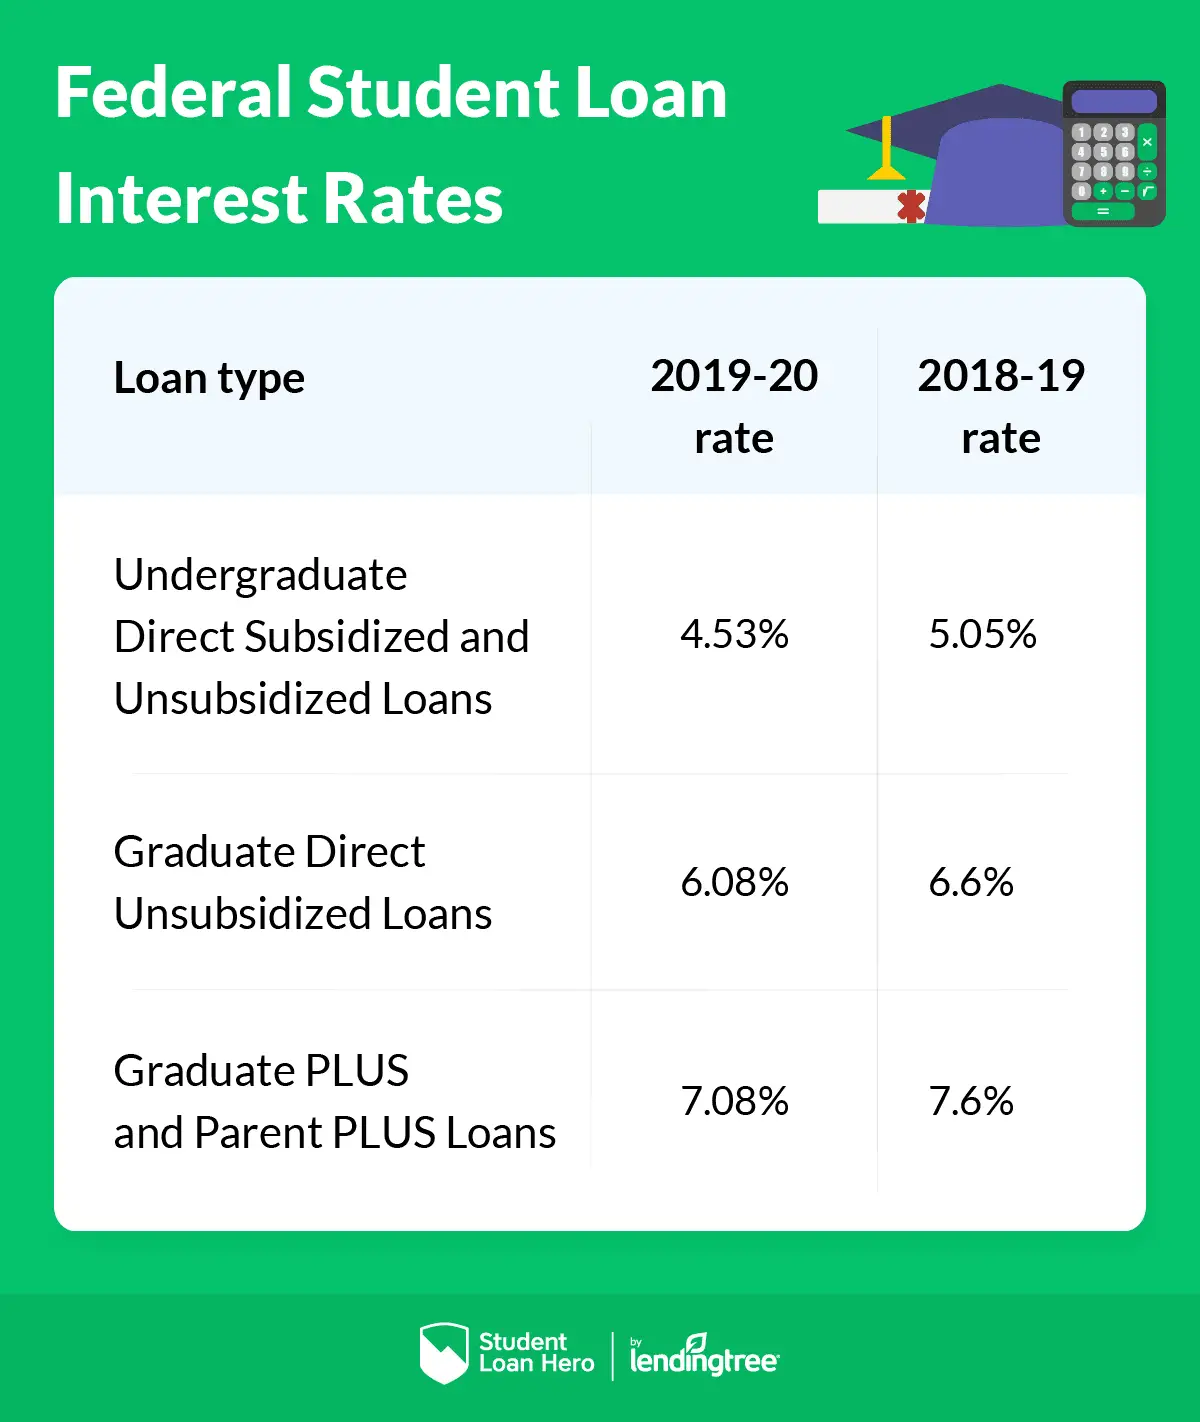 What Lower Interest Rates in 2019